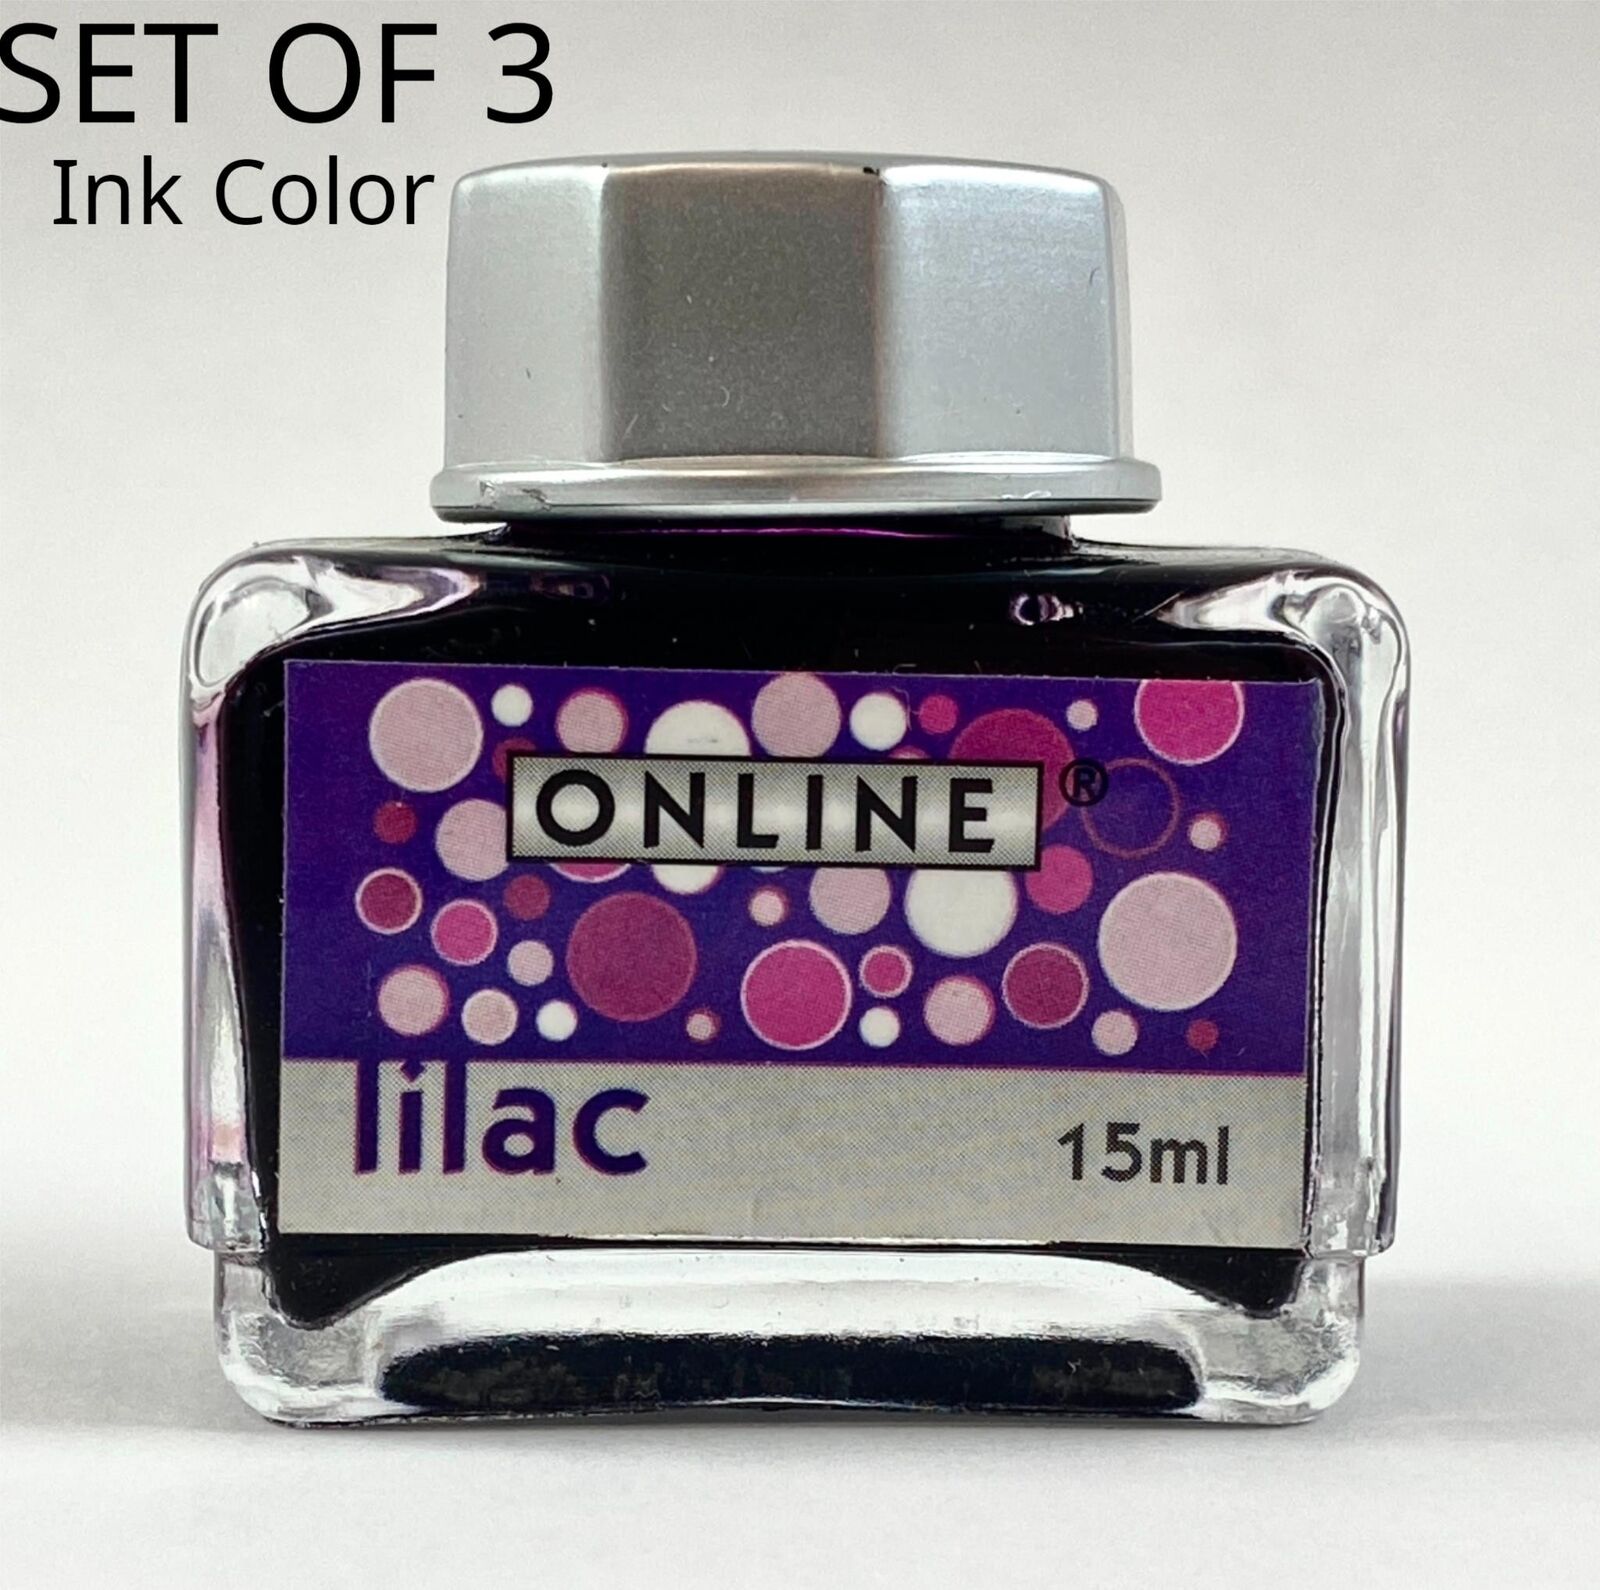 Online Ink Colour Inspiration Lilac 15 ml Set of 3